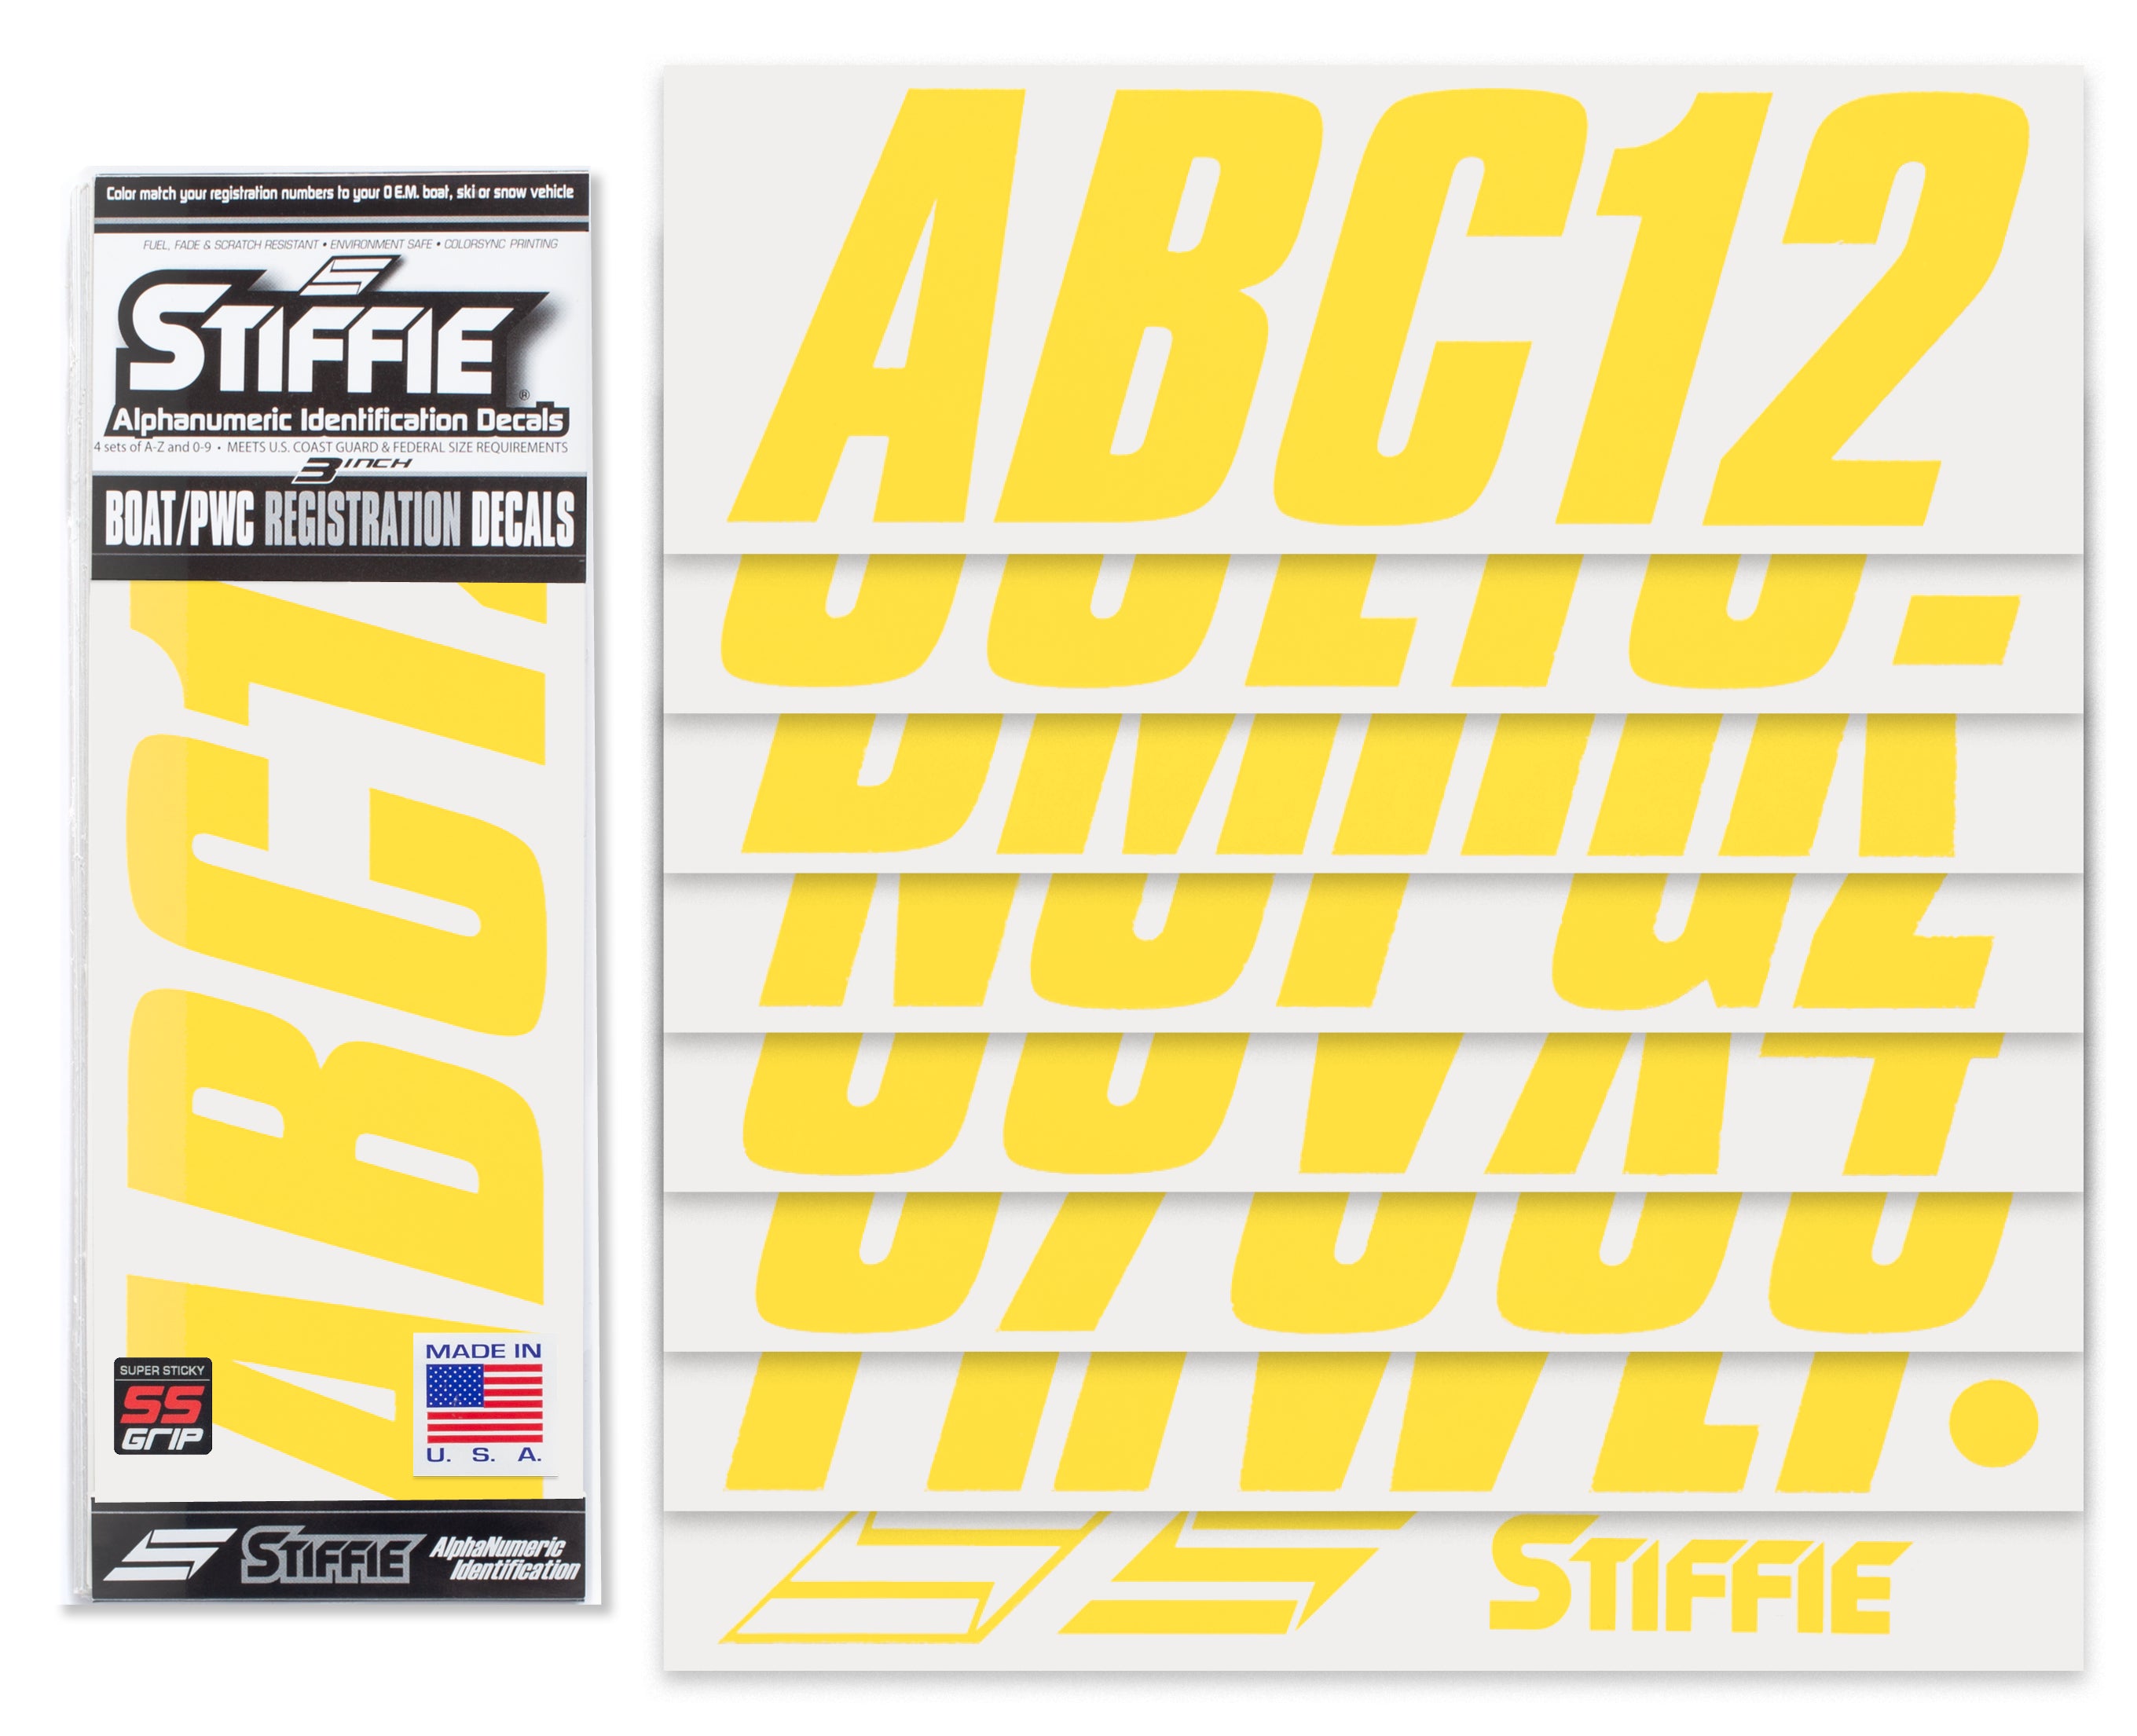 STIFFIE Shift Yellow Crush Super Sticky 3" Alpha Numeric Registration Identification Numbers Stickers Decals for Sea-Doo Spark, Inflatable Boats, Ribs, Hypalon/PVC, PWC and Boats.